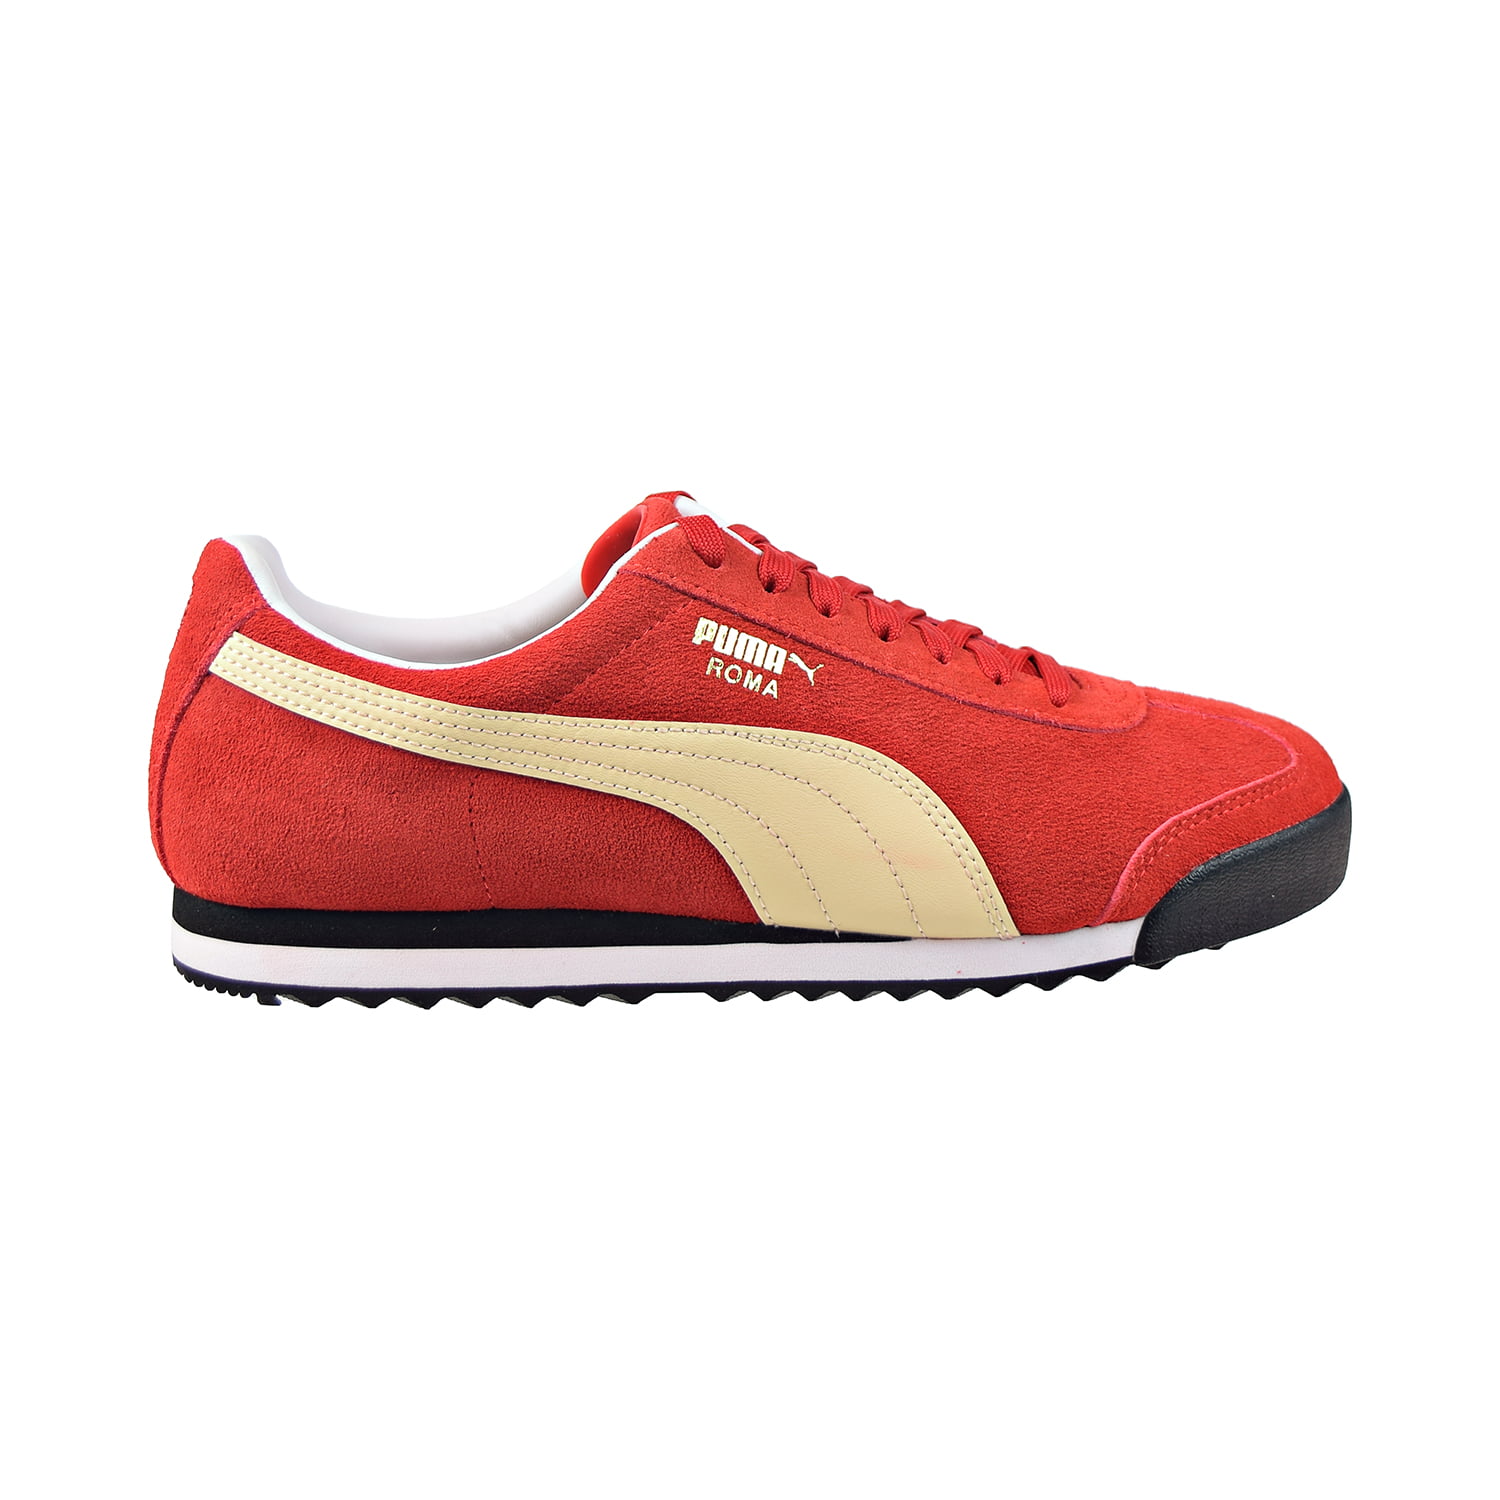 Puma Roma Suede Men's Shoes High Risk Red/Summer Melon 365437-13 ...